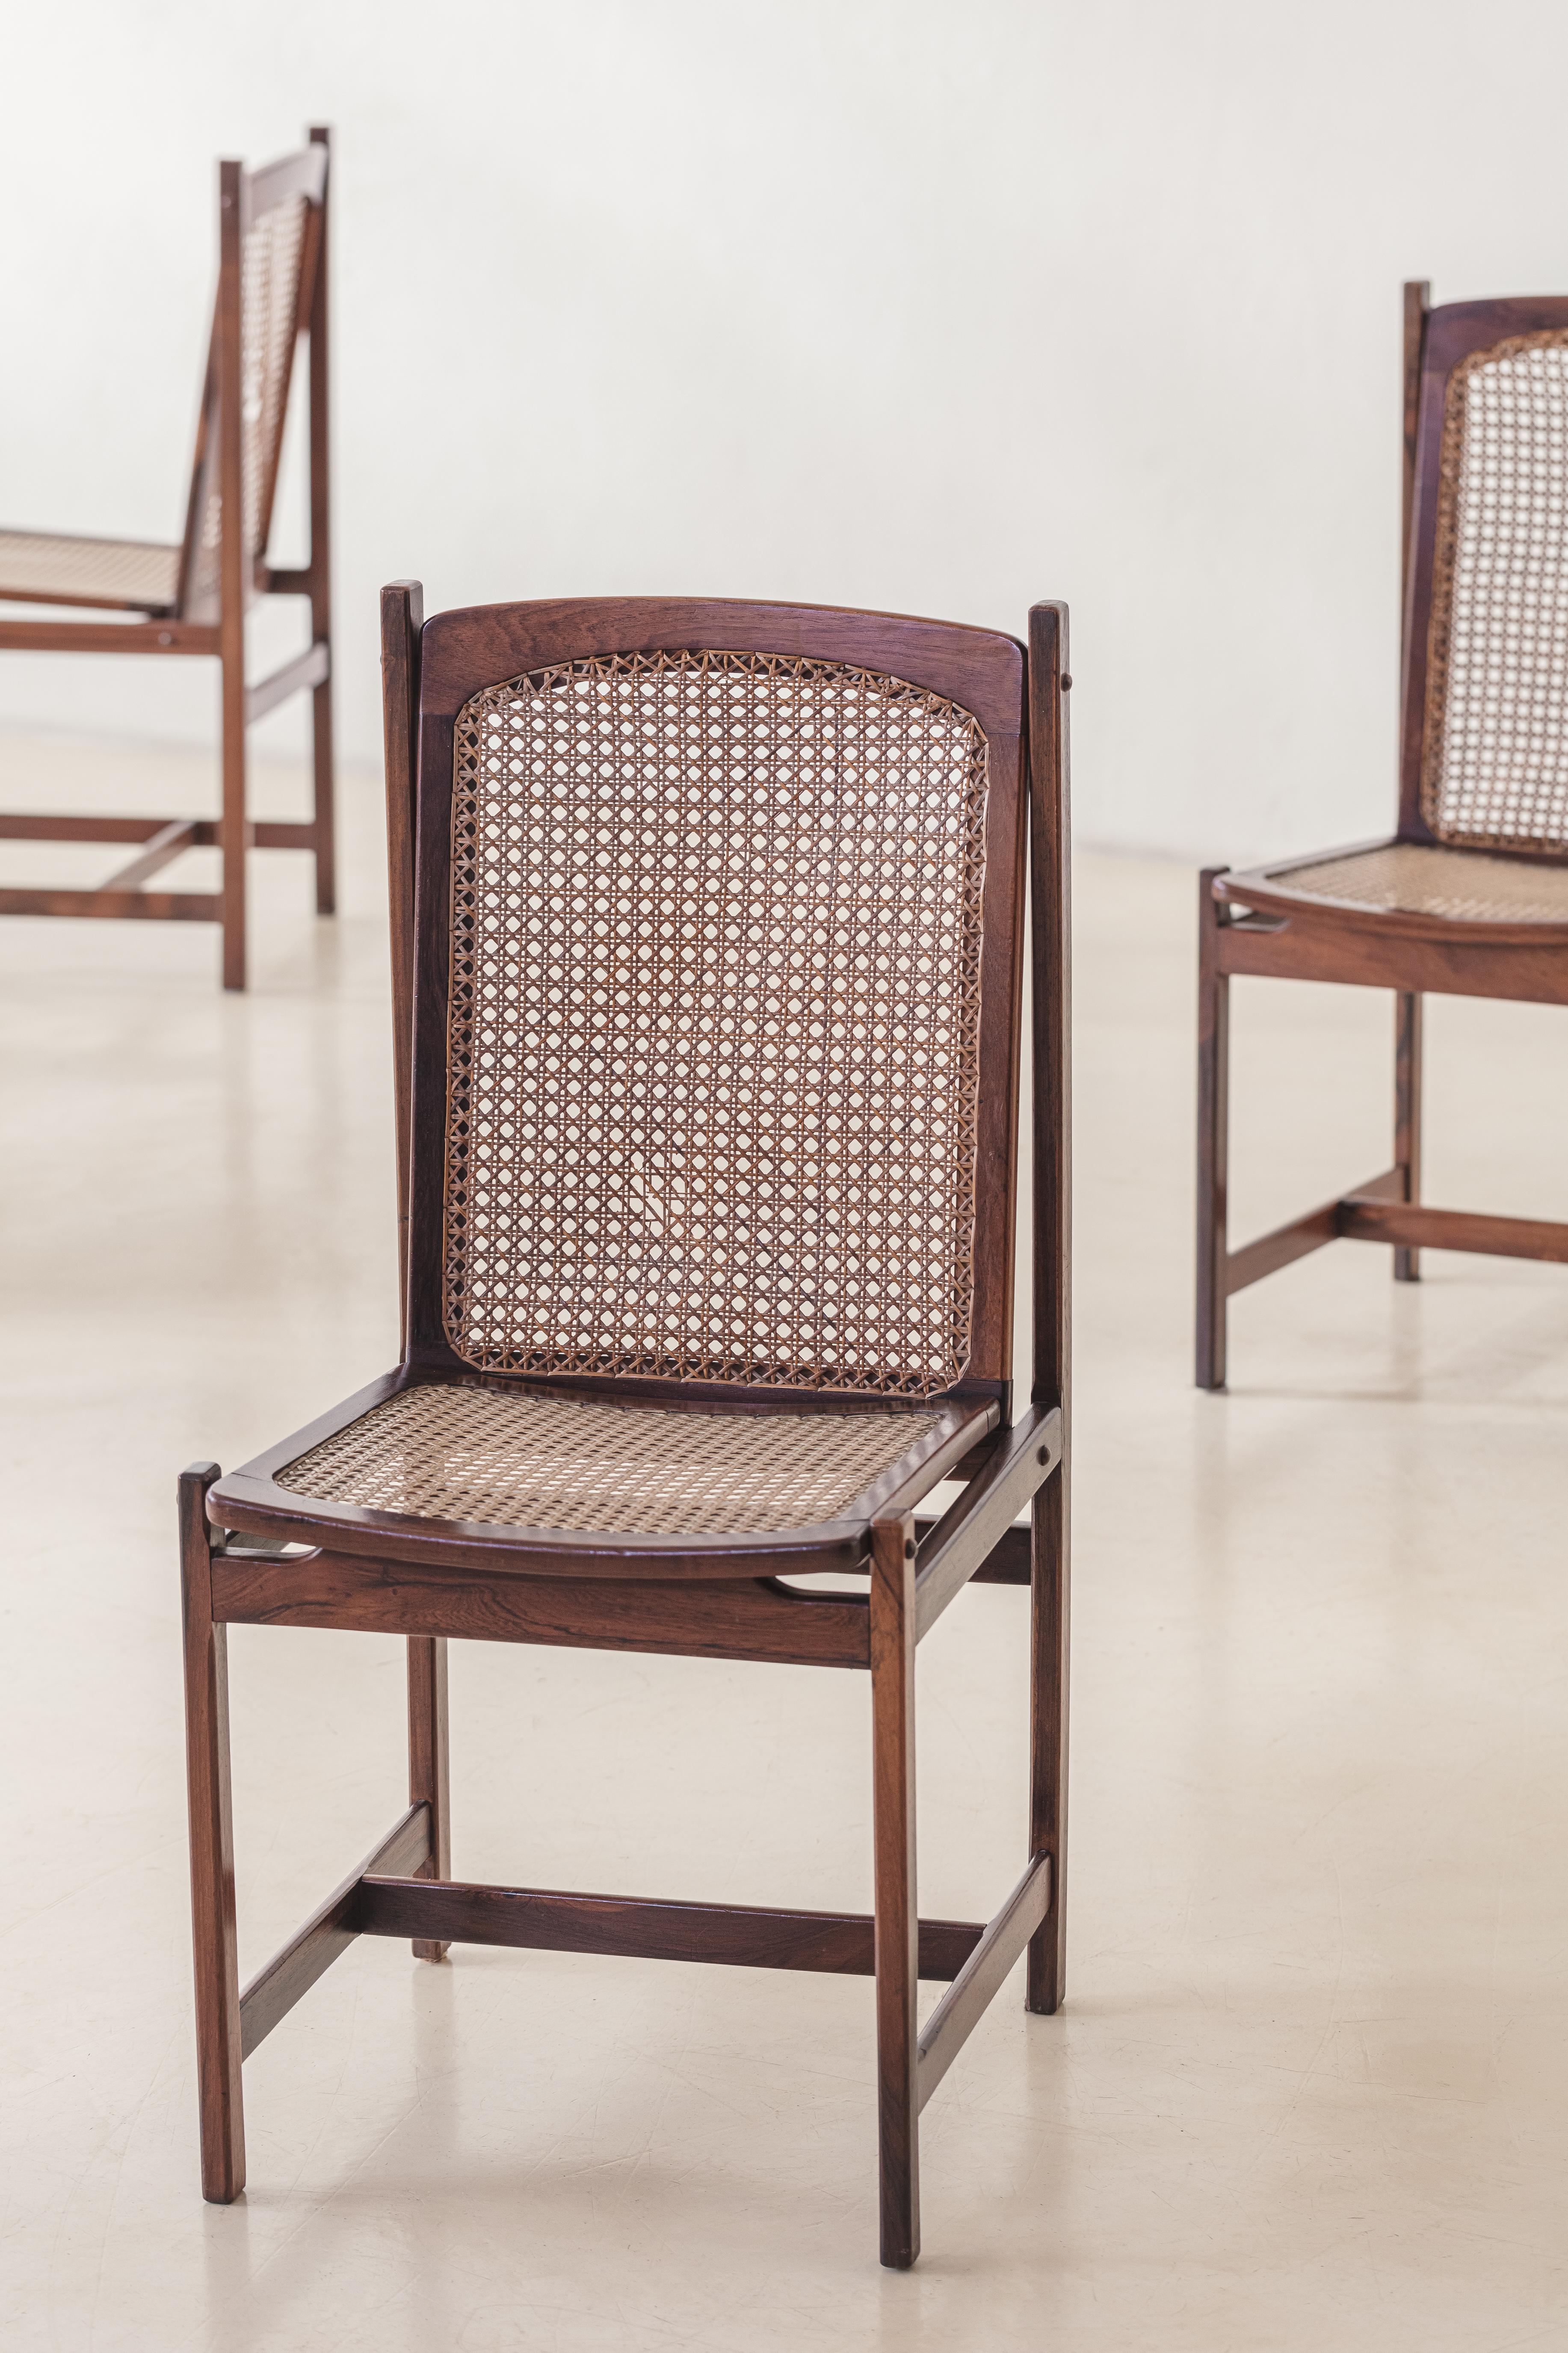 Tissage Celina Decorações set of six Dining Chairs, Rosewood and Cane, Mid-Century 1960s en vente